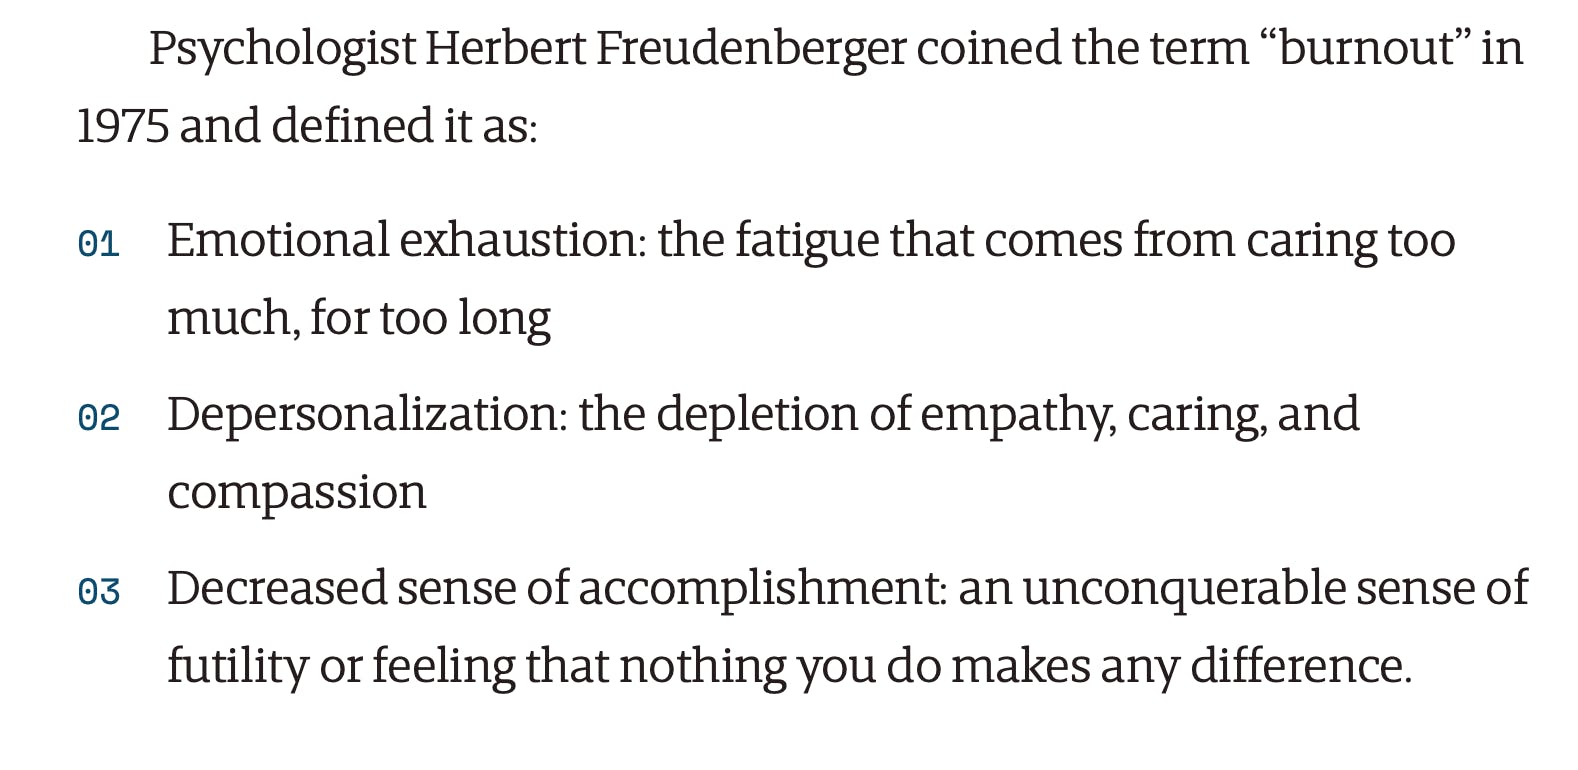 Psychologist Herbert Freudenberger coined the term “burnout” in 1975 and defined it as: Emotional exhaustion: the fatigue that comes from caring too much, for too long Depersonalization: the depletion of empathy, caring, and compassion Decreased sense of accomplishment: an unconquerable sense of futility or feeling that nothing you do makes any difference.